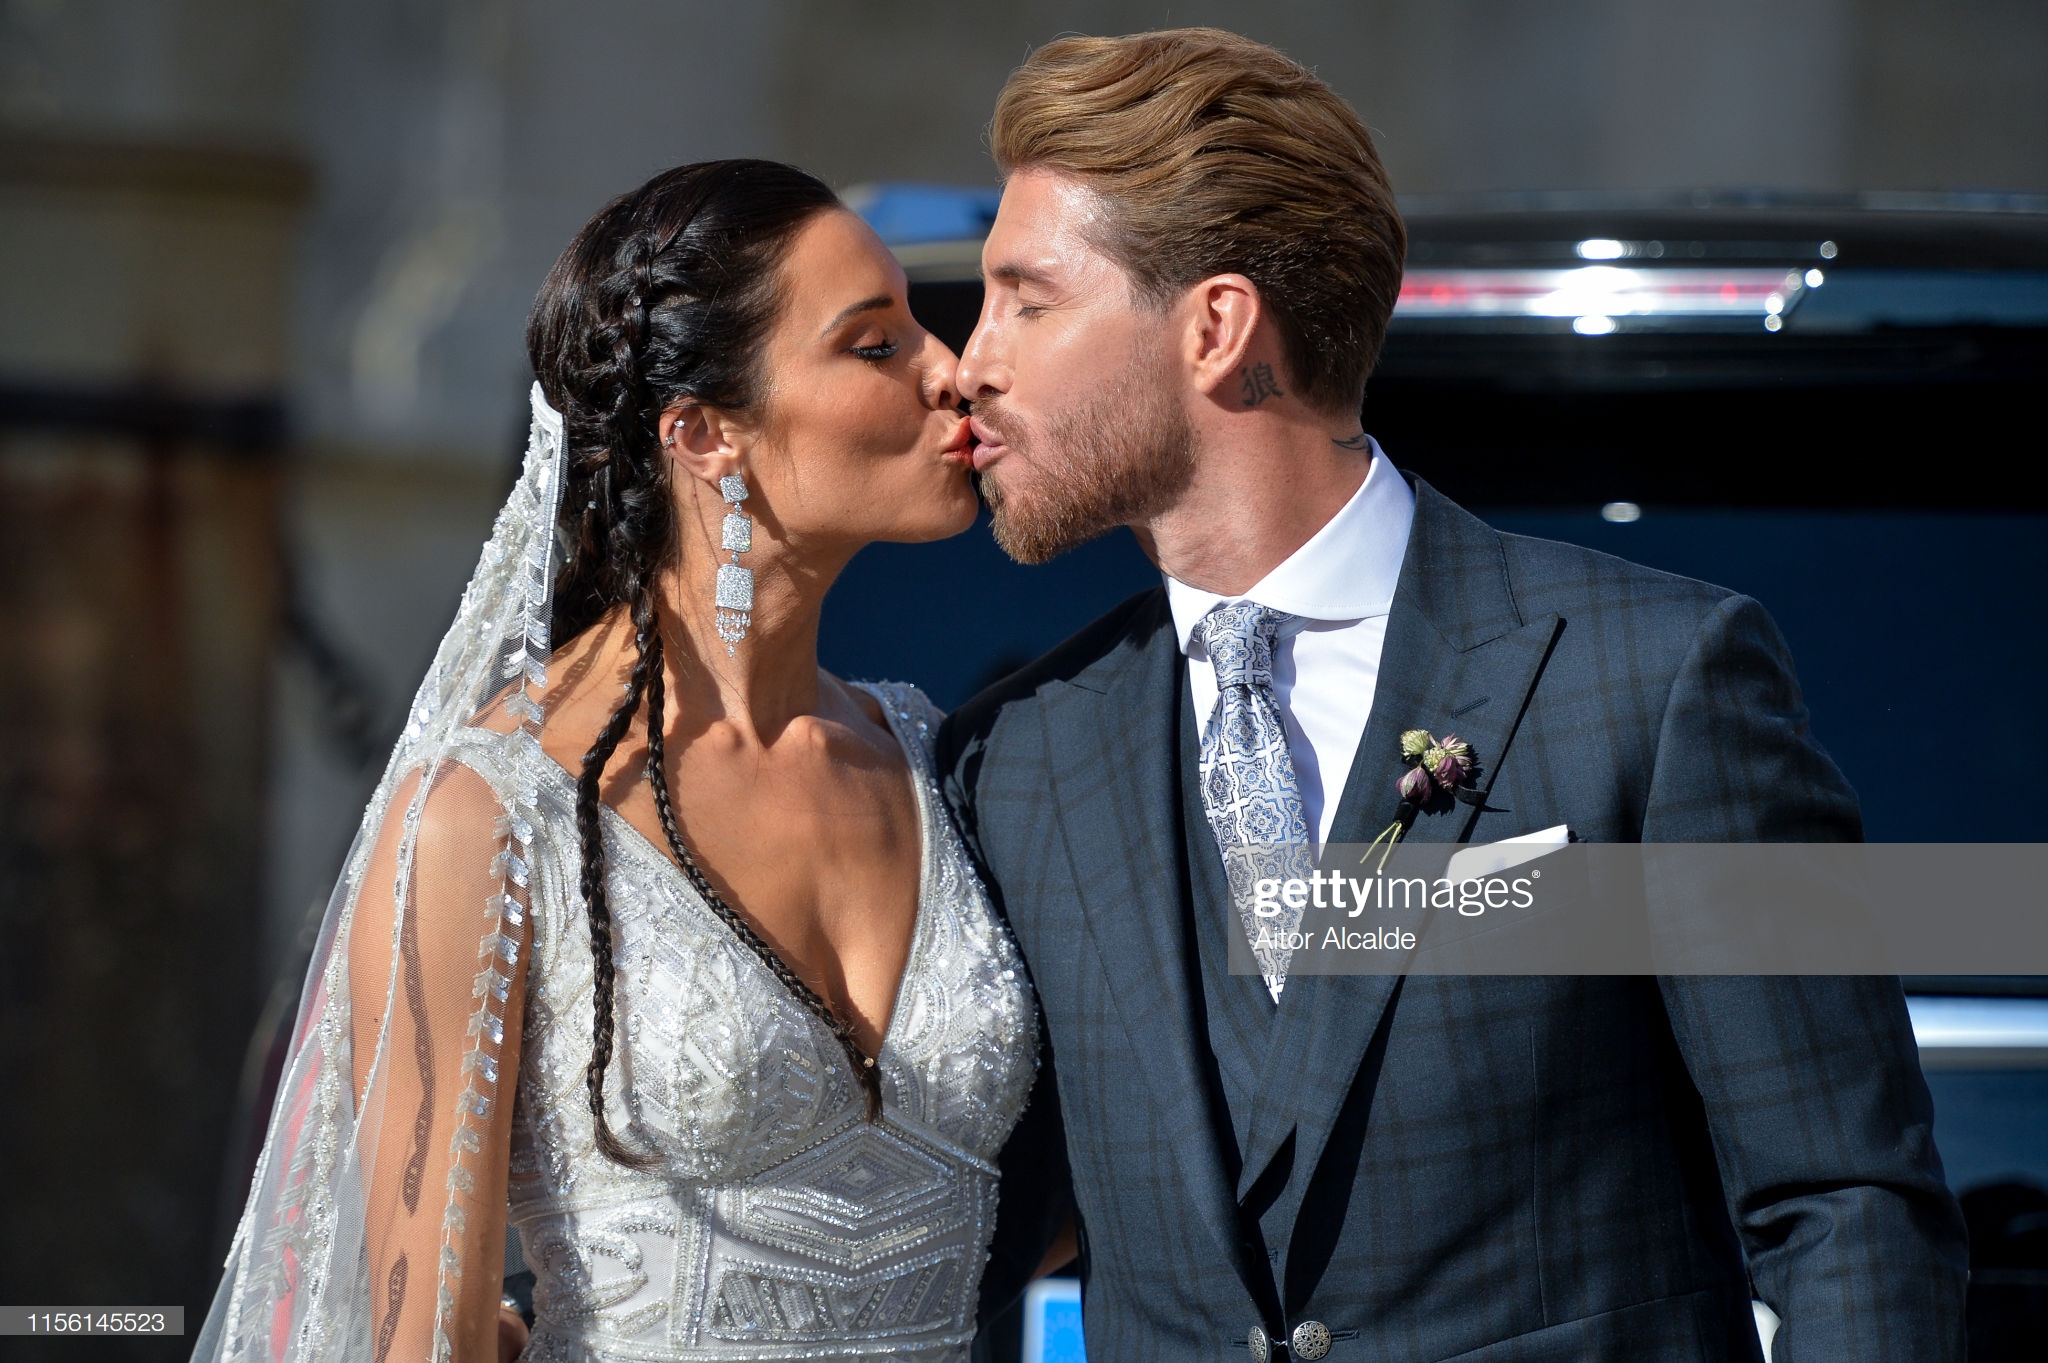 gettyimages-1156145523-2048x2048.jpg